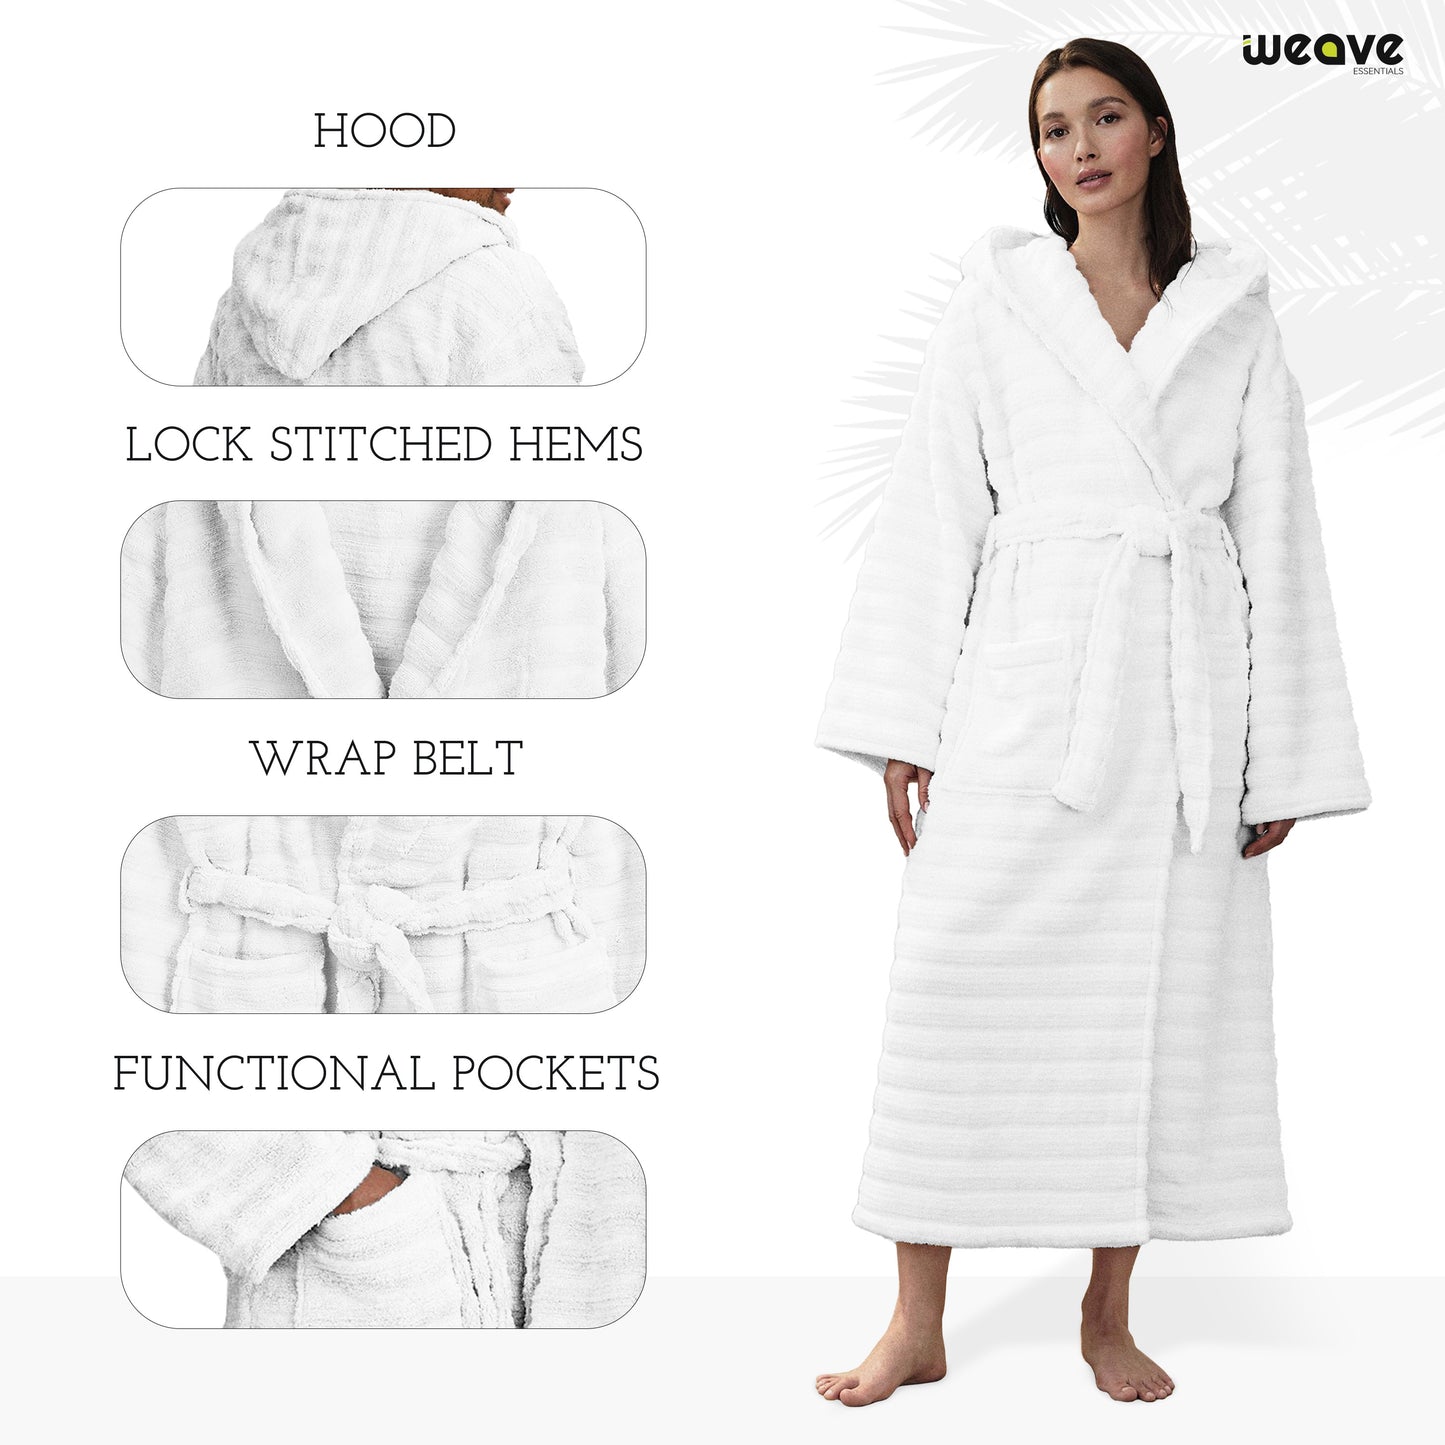 PREMIUM RIBBED TOWELING DRESSING GOWN: 100% COTTON-Striped & Ribbed Terry Toweling Hooded Bathrobe-Weave Essentials-Pastel Blue-S/M-Weave Essentials